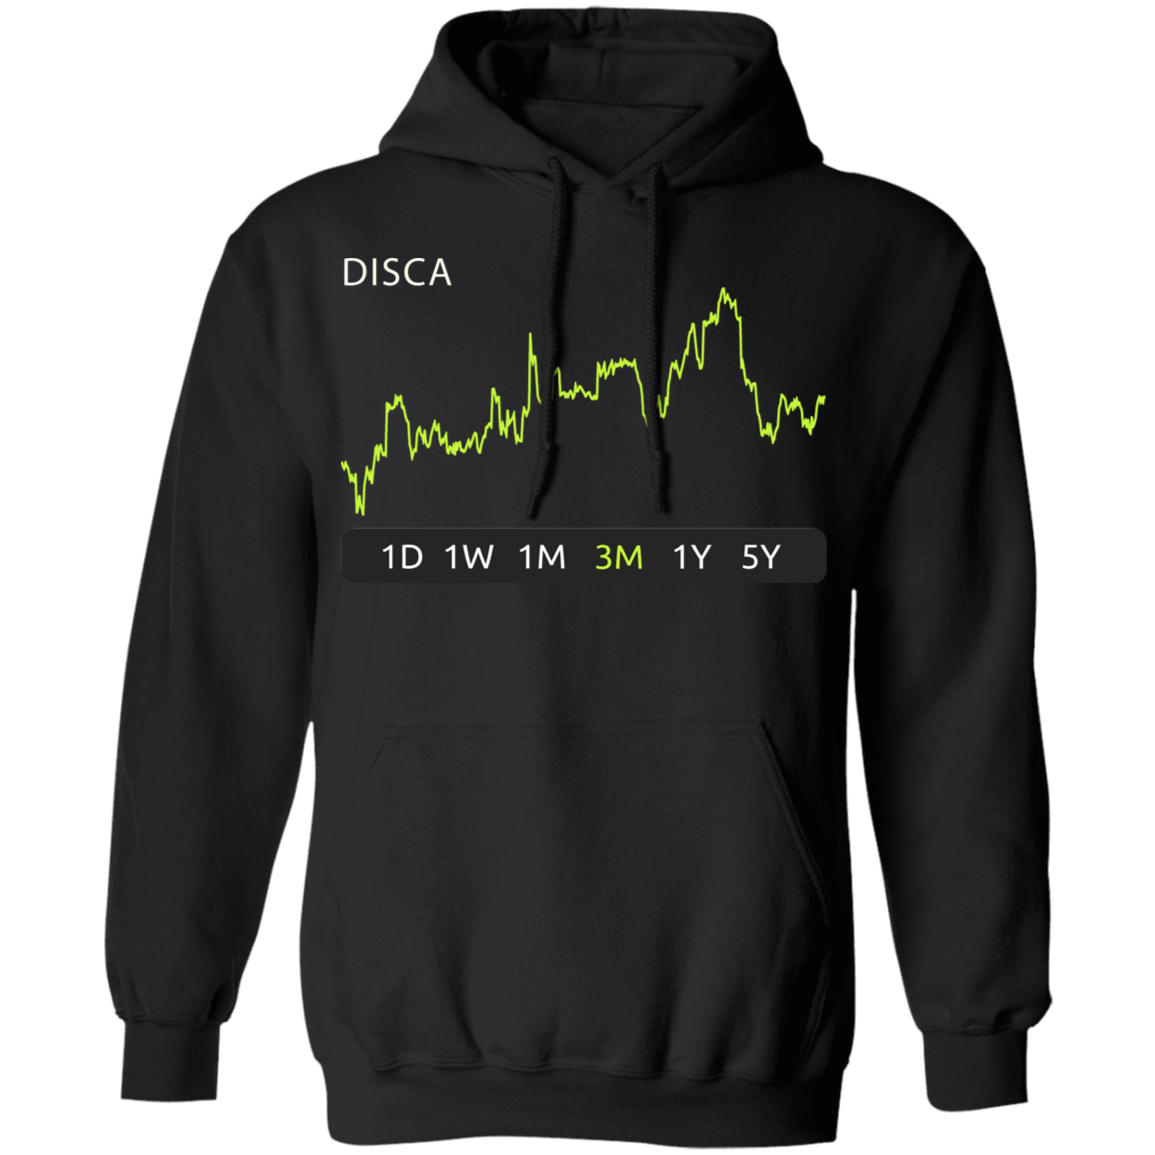 DISCA Stock 3m Pullover Hoodie